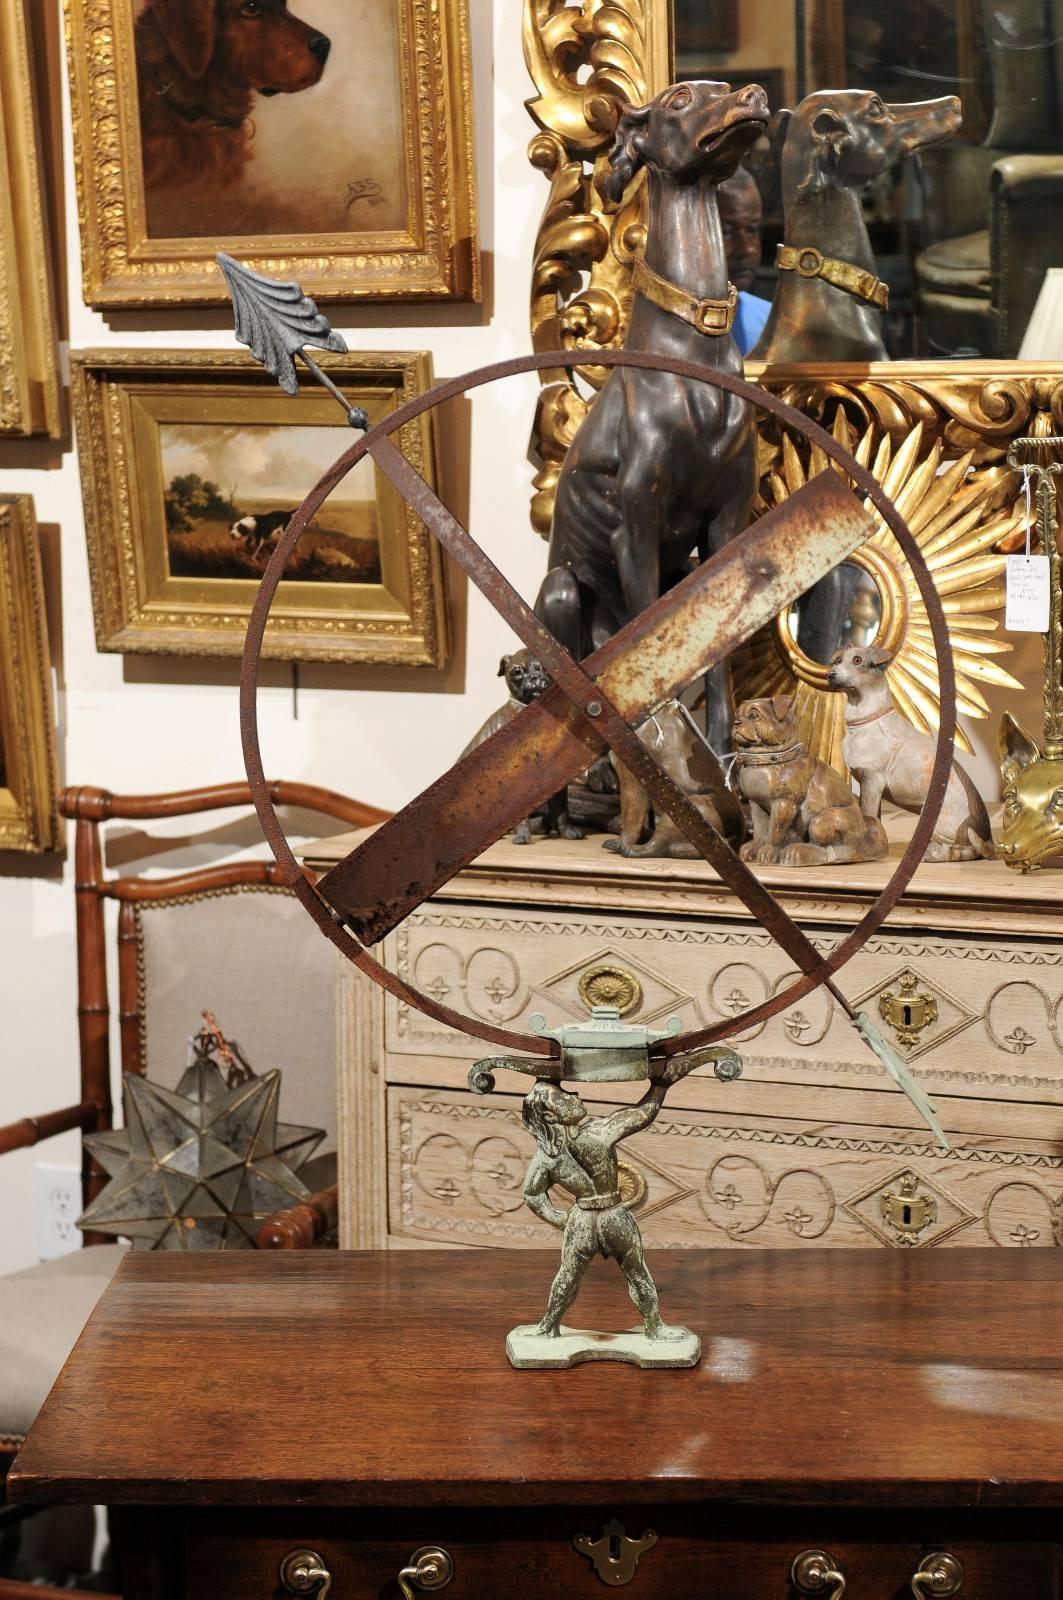 A Swedish copper armillary depicting Atlas carrying the world from the early 20th century. The famed Titan Atlas was condemned to carry the sky on his shoulders for eternity. How appropriate then, to choose him to carry, effortlessly this armillary!